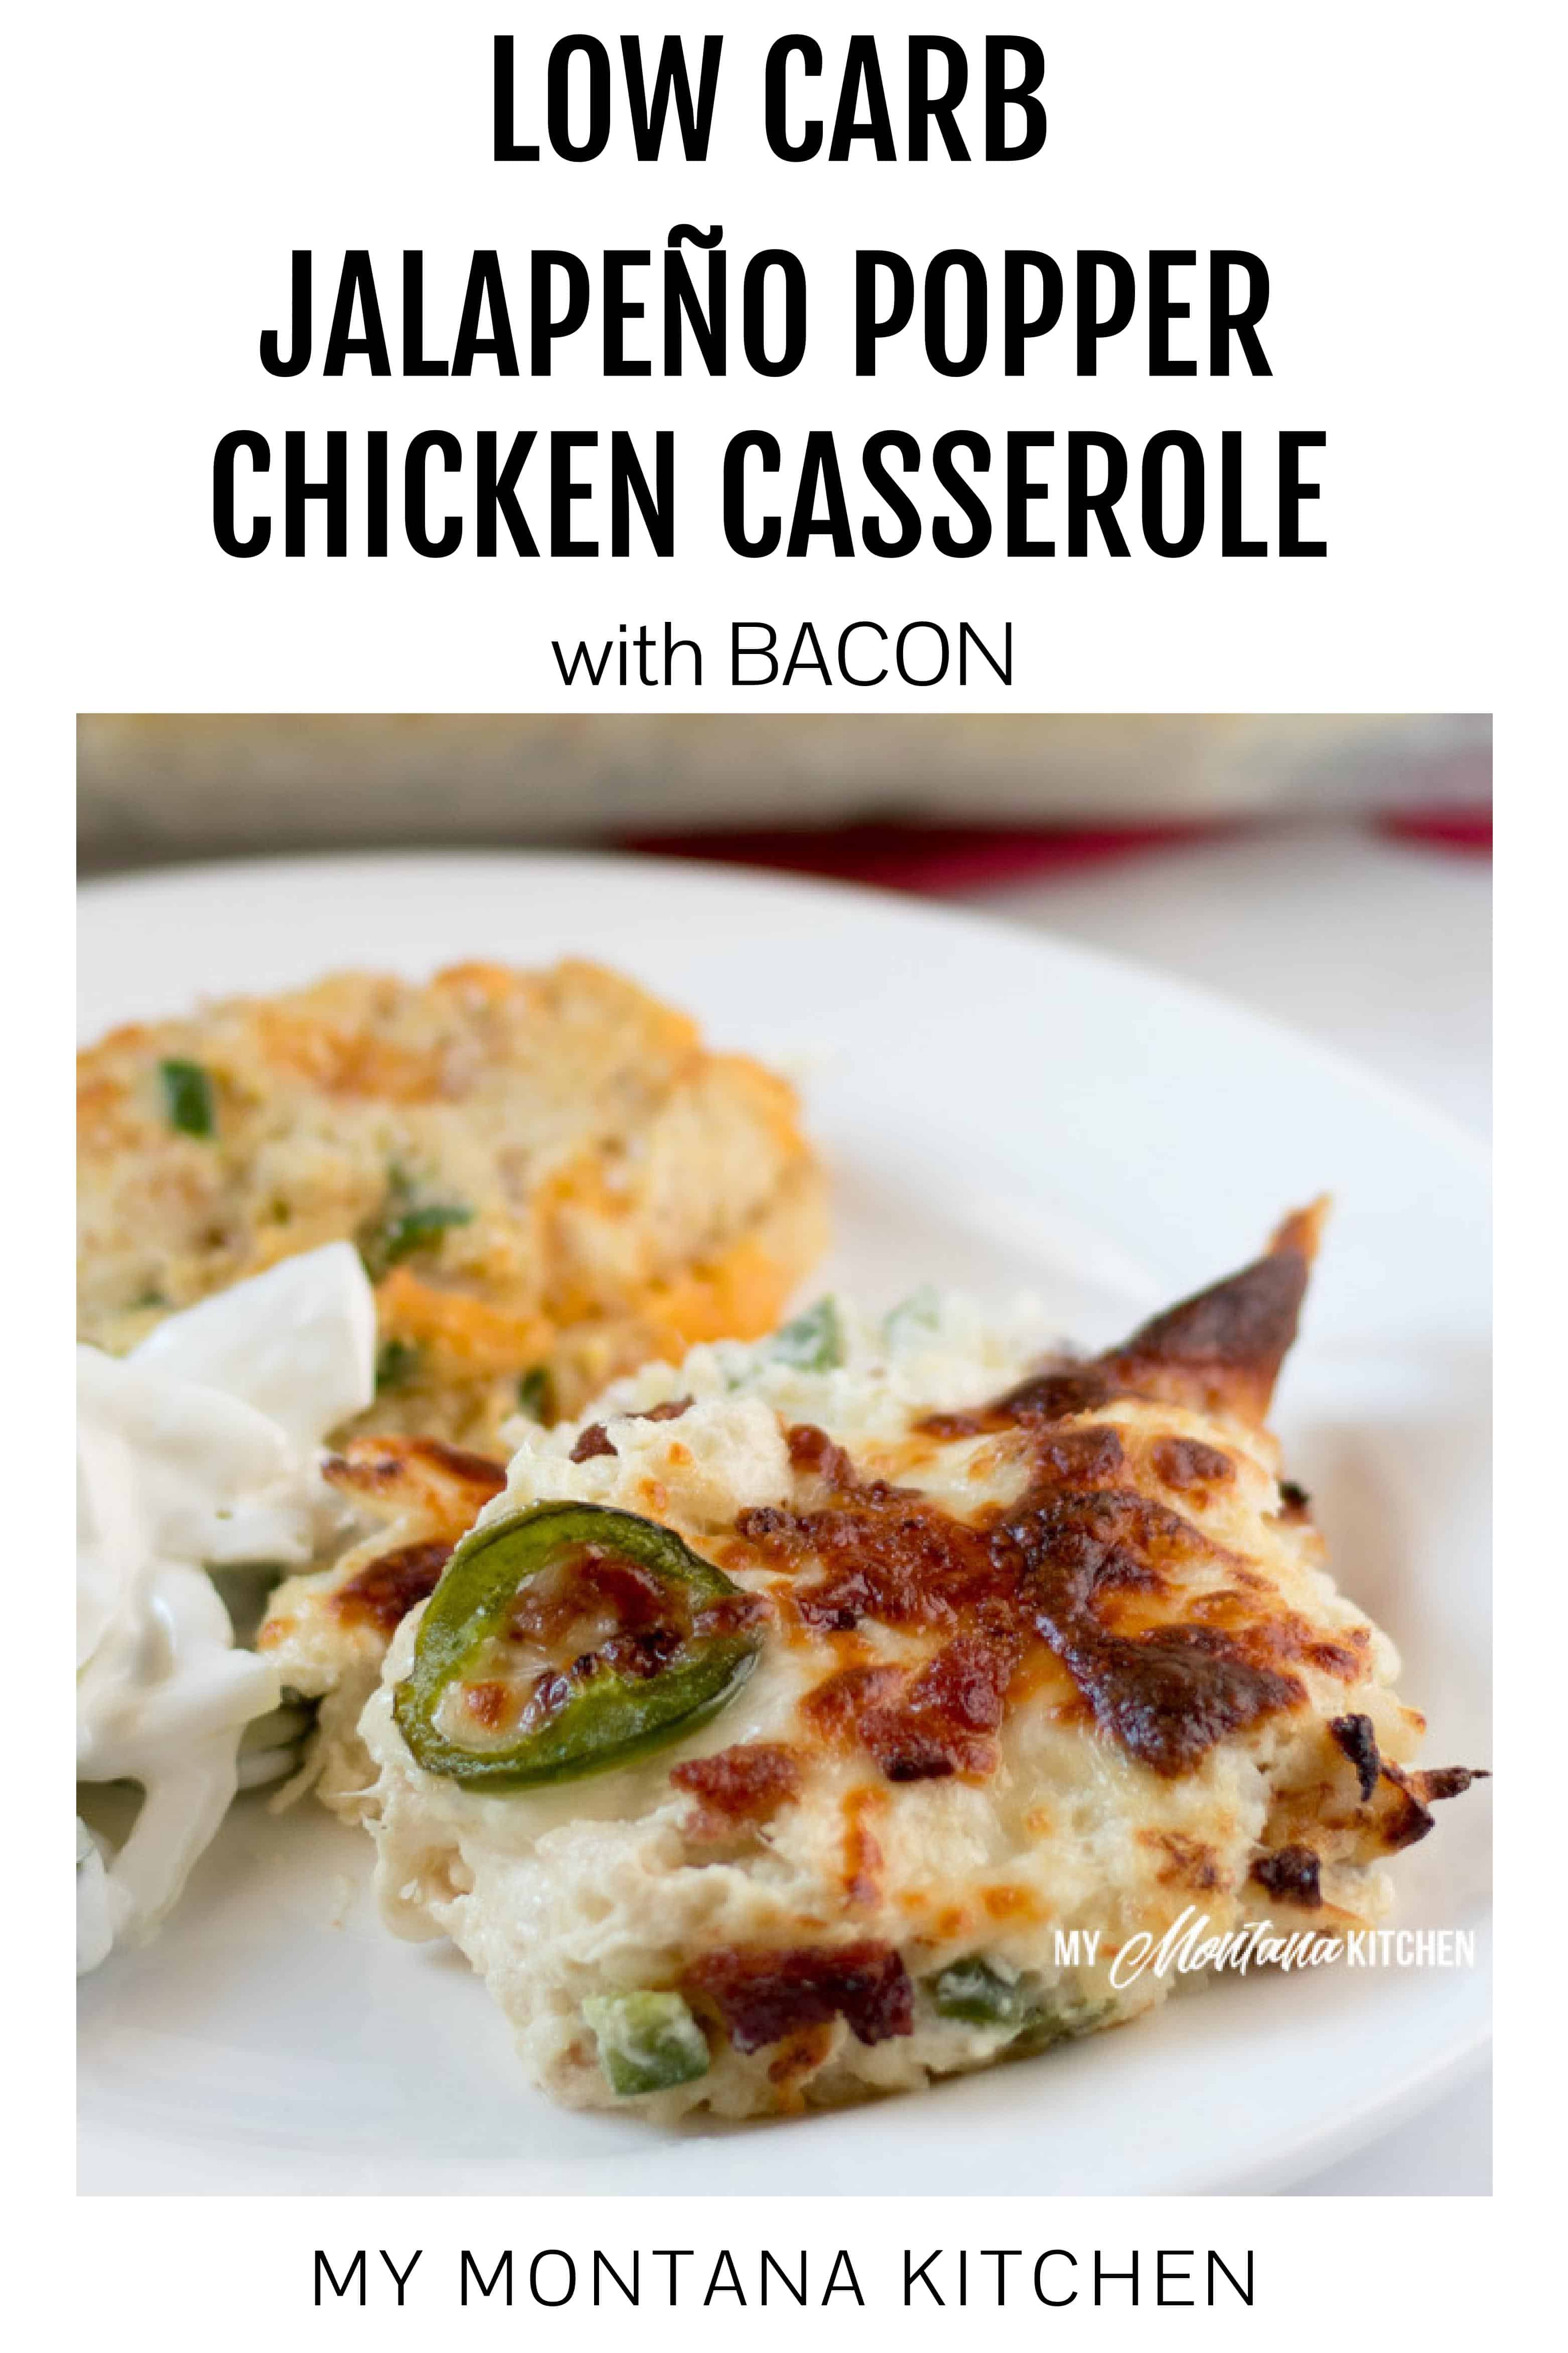 This low carb keto chicken casserole is spicy, savory, and downright mouthwatering. Jalapeño popper chicken casserole with bacon is about to become a weeknight favorite in your home when you need an easy, one dish keto dinner that the whole family will enjoy. Serve it up all on its own or with your vegetables or fresh salad on the side. #ketochickencasserole #lowcarbchickenrecipe